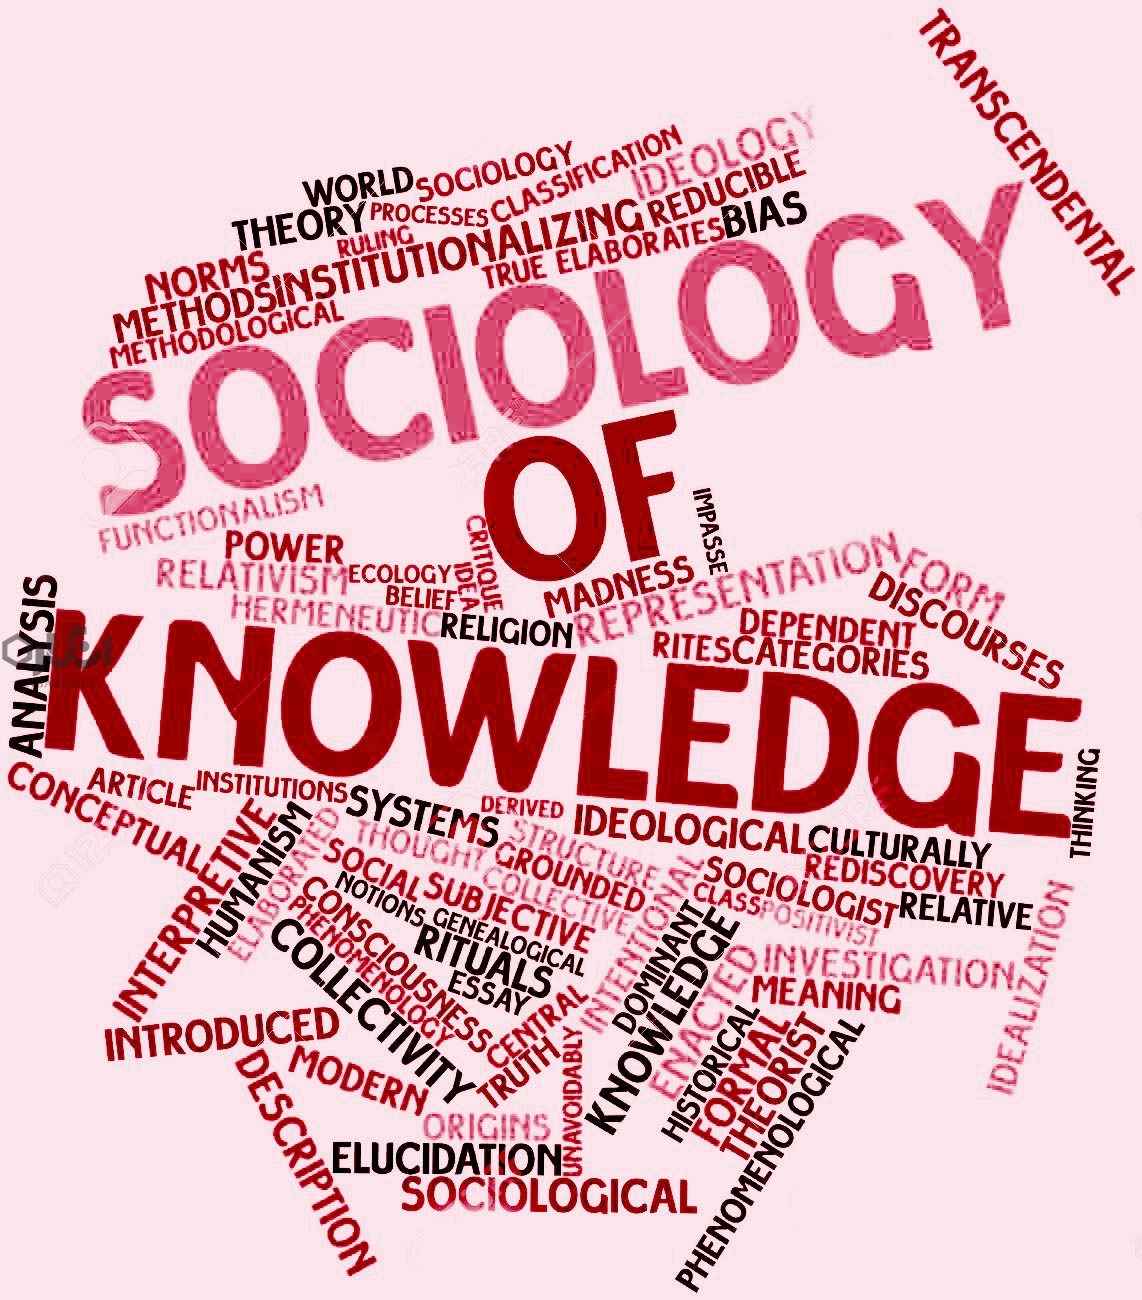 sociology of knowledge with related tags and terms - جامعه شناسی معرفت - لوییس کوزر, فرانسه, سعید سبزیان, دورکیم, جامعه شناسی معرفت, جامعه شناسی, جامعه شناختی, پراگماتیسم, بیکن, ایدئولوژی